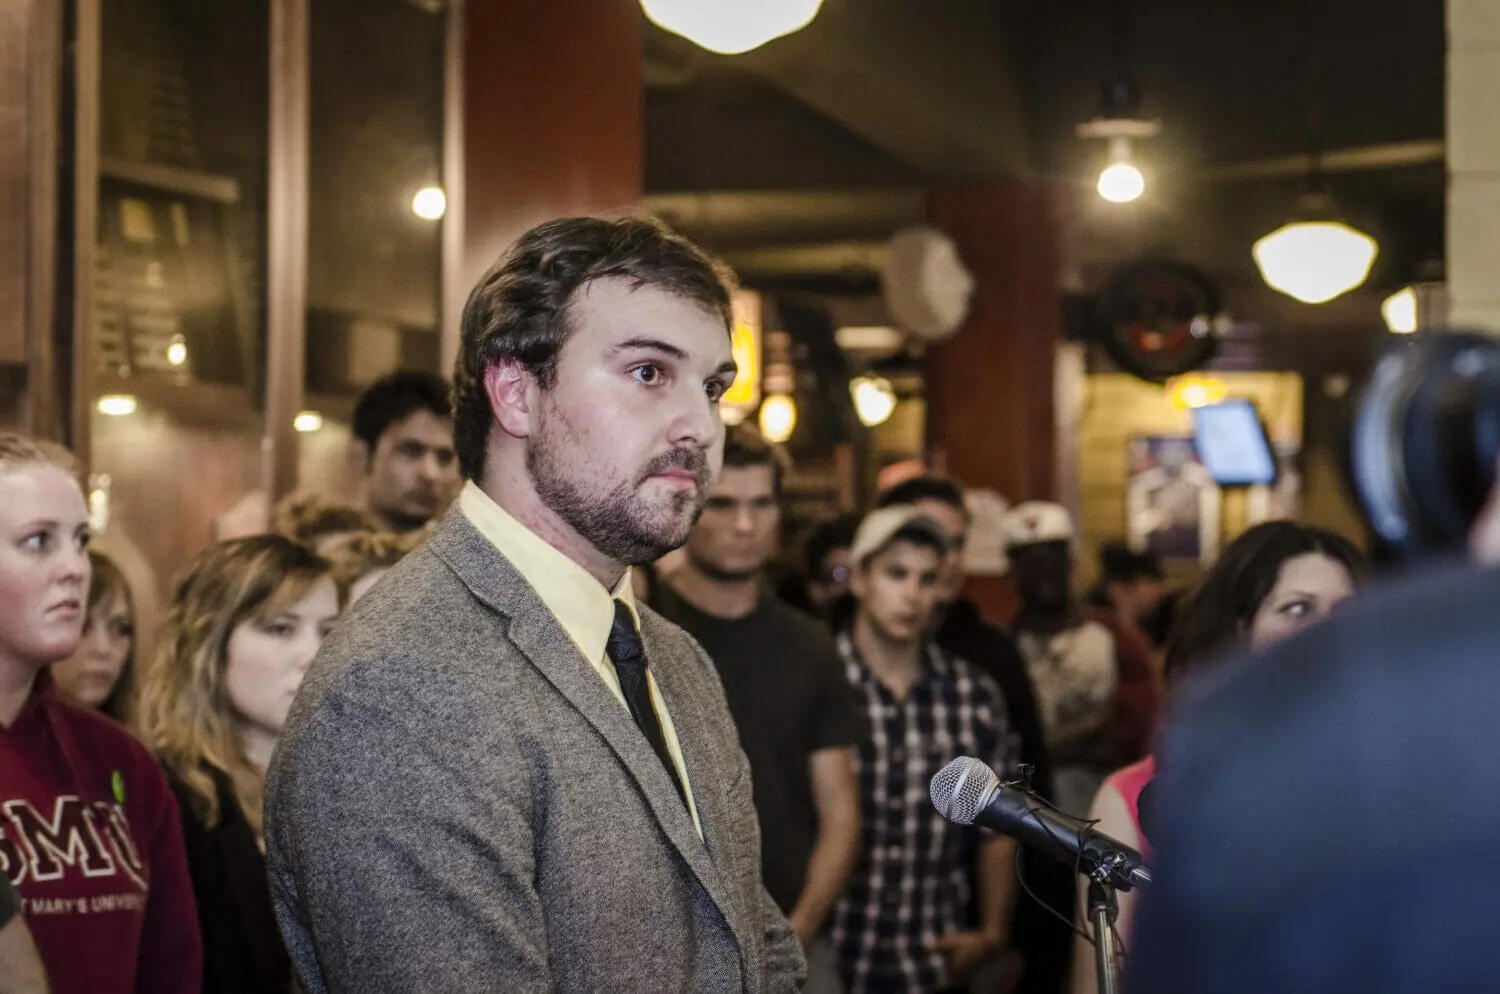 SMUSA president Jared Perry addresses the press on September 5 before stepping down the next day. He participated in the chant. (Calum Agnew photo)